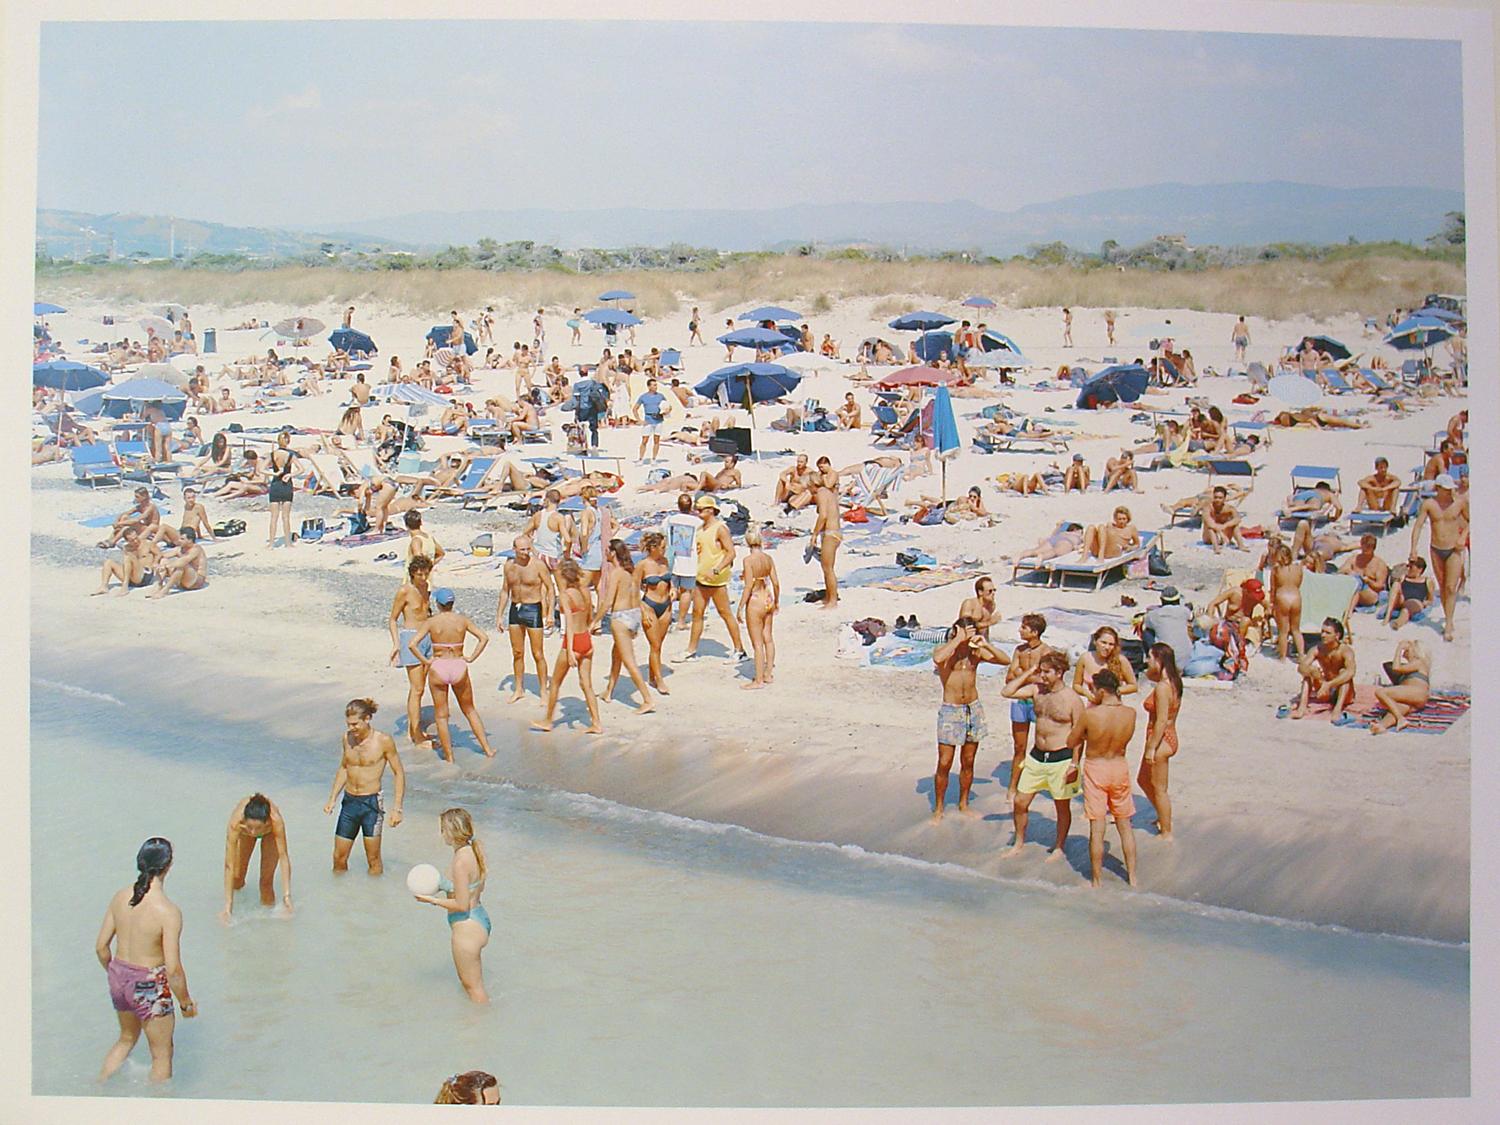 This diptych, part of the well-known Massimo Vitali Landscape with Figures portfolio, shows two views along the same beach, where the crowd wades in the water, chats, suns, strolls, and watches each other.  